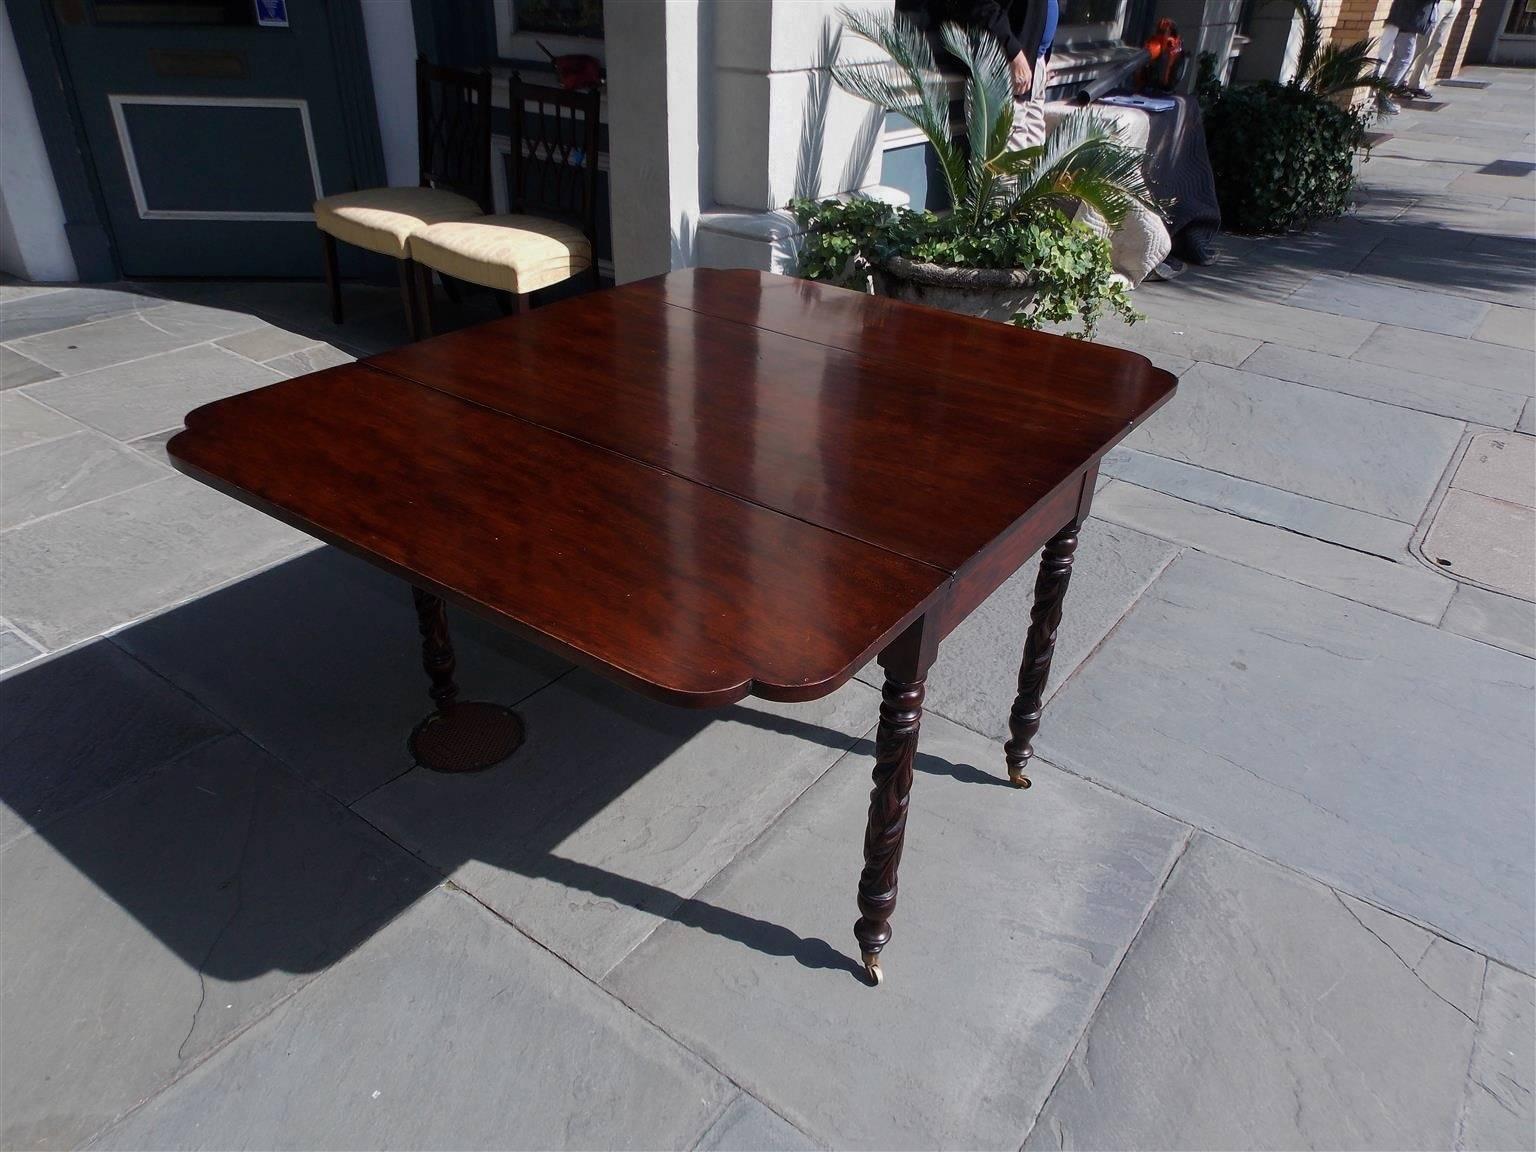 Early 19th Century American Sheraton Cherry Acanthus Carved Drop-Leaf Table on Casters, Circa 1820 For Sale